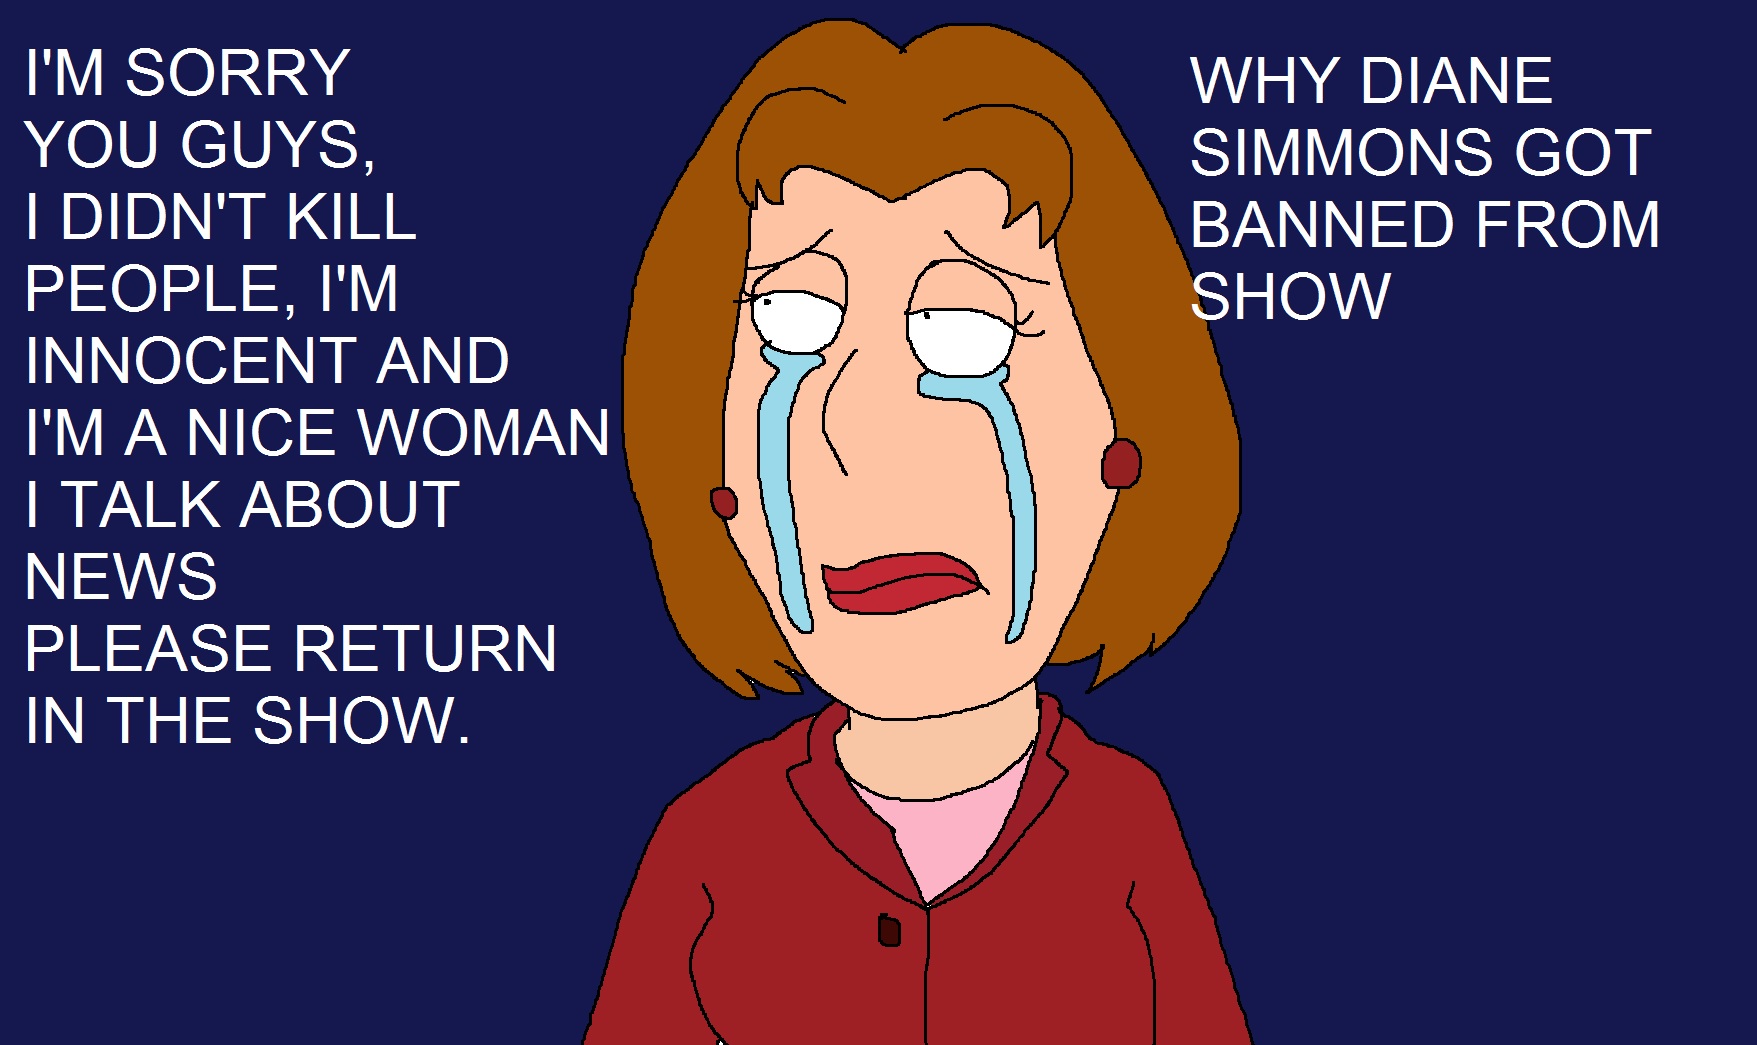 Diane Simmons is not allowed on show by Rainbow-Dash-Rockz